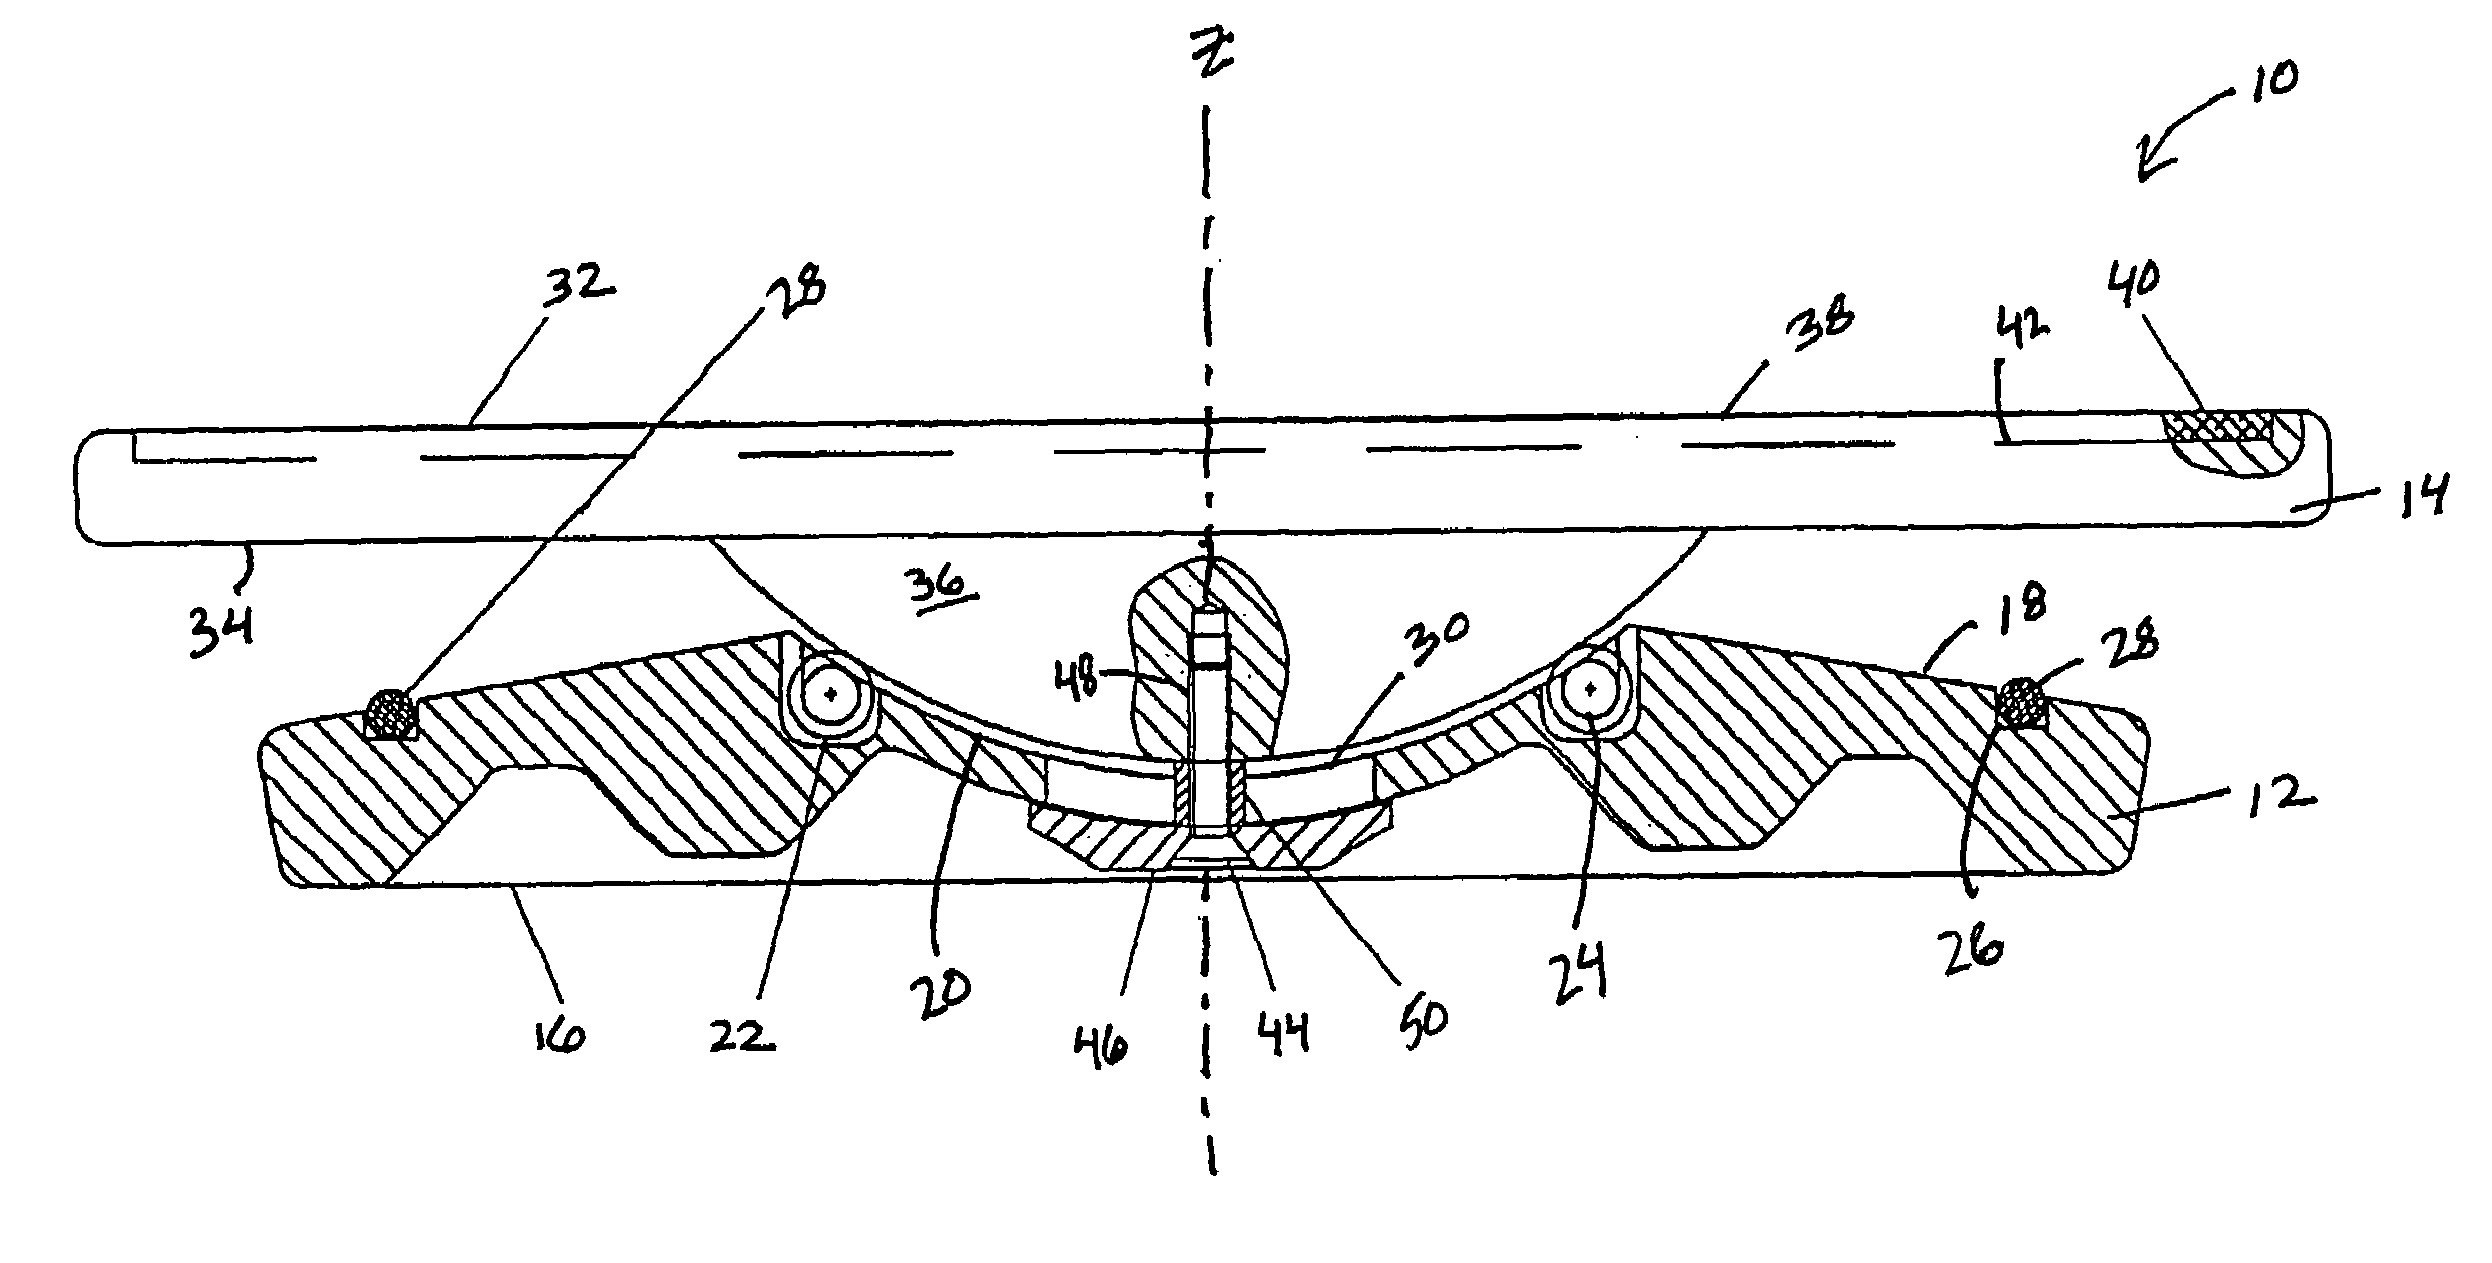 Therapy device having a rotatably tiltable platform